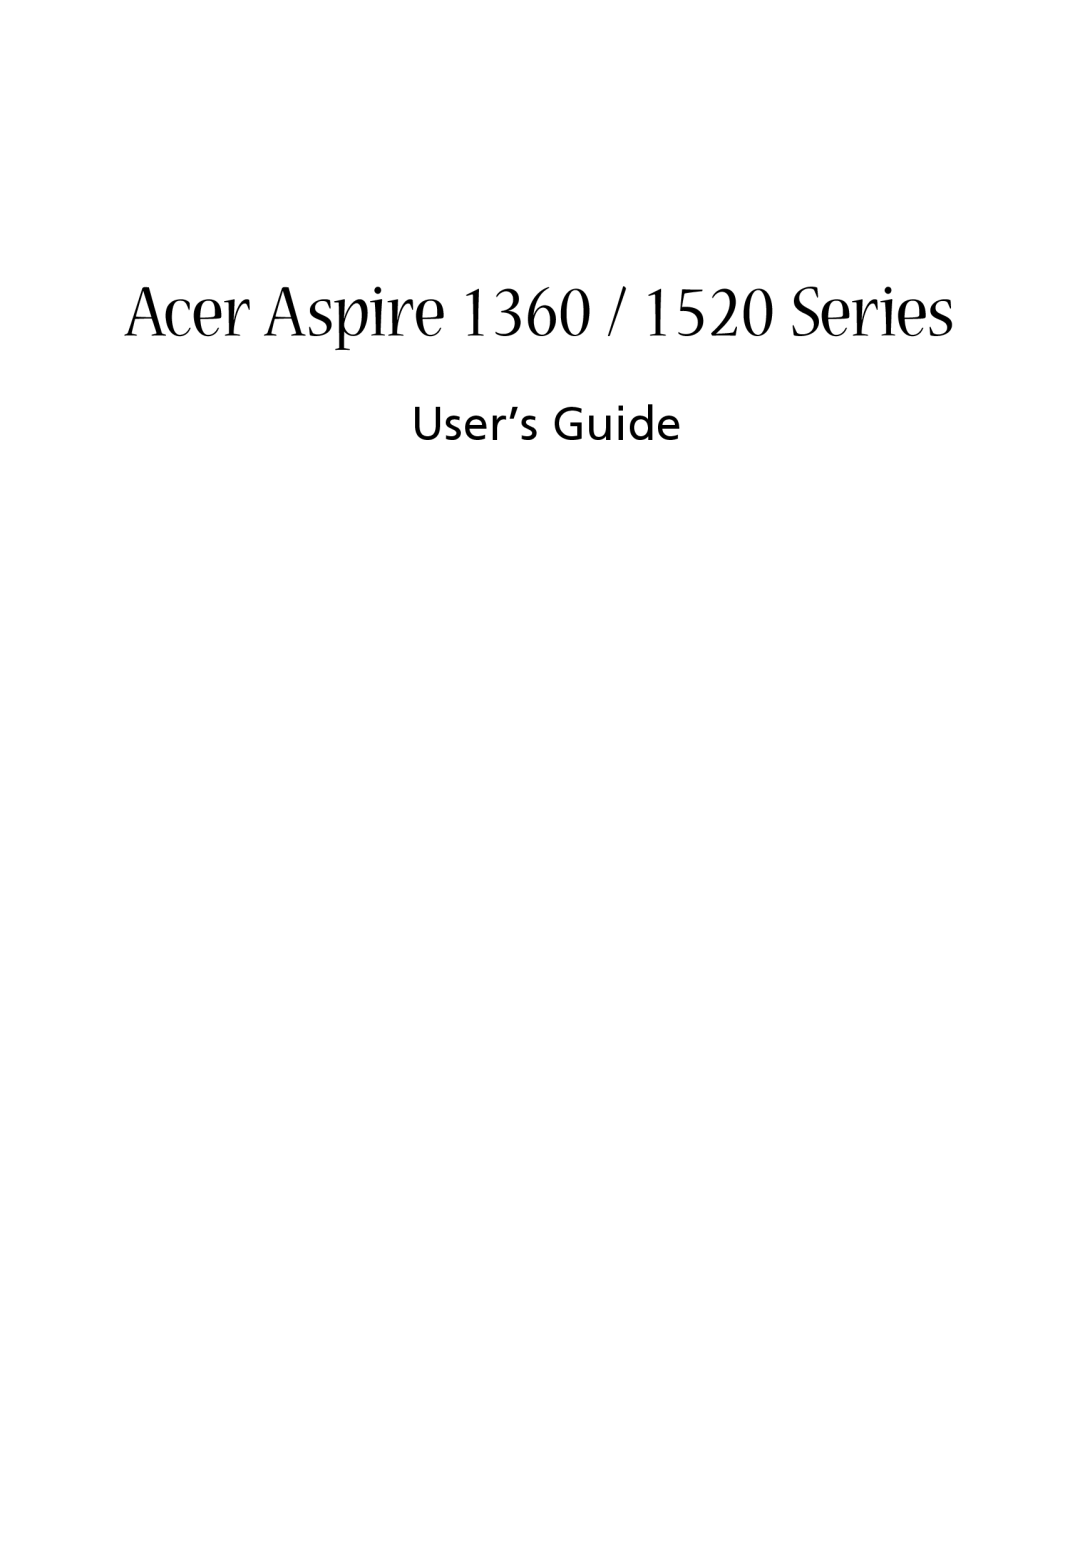 Acer manual Acer Aspire 1360 / 1520 Series, User’s Guide 